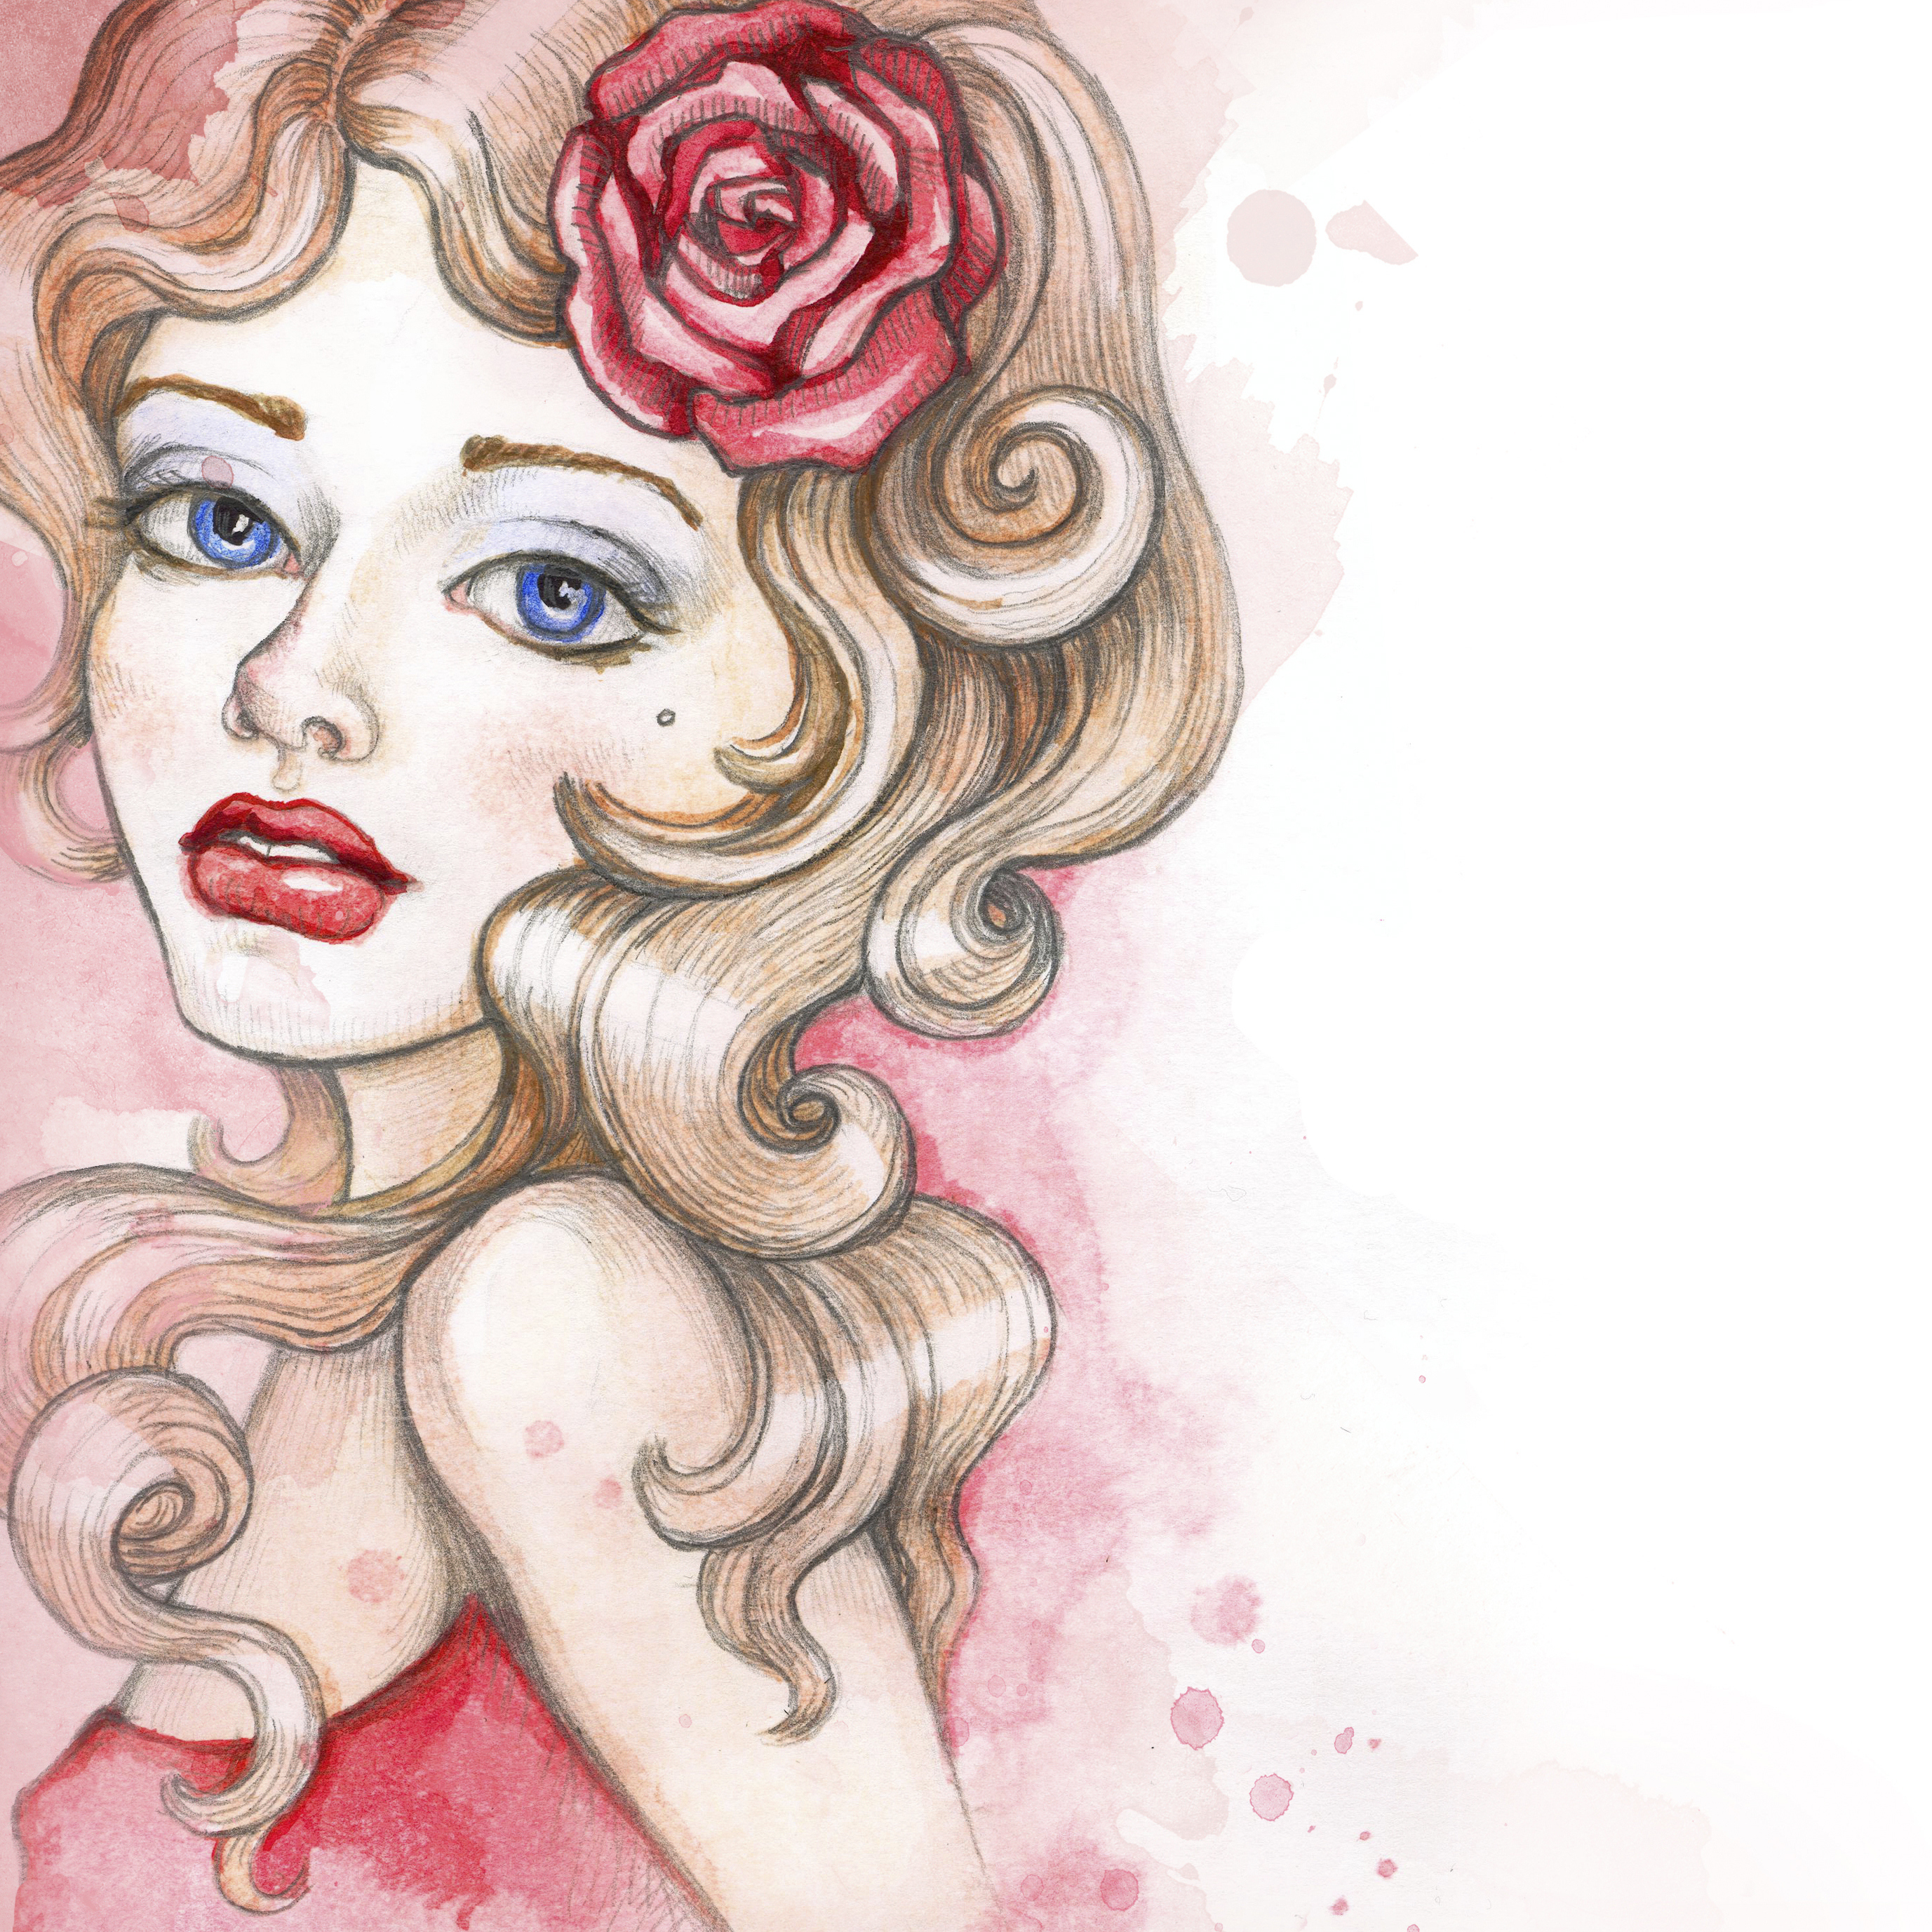 illustration of a woman with blonde hair and a rose in her hair